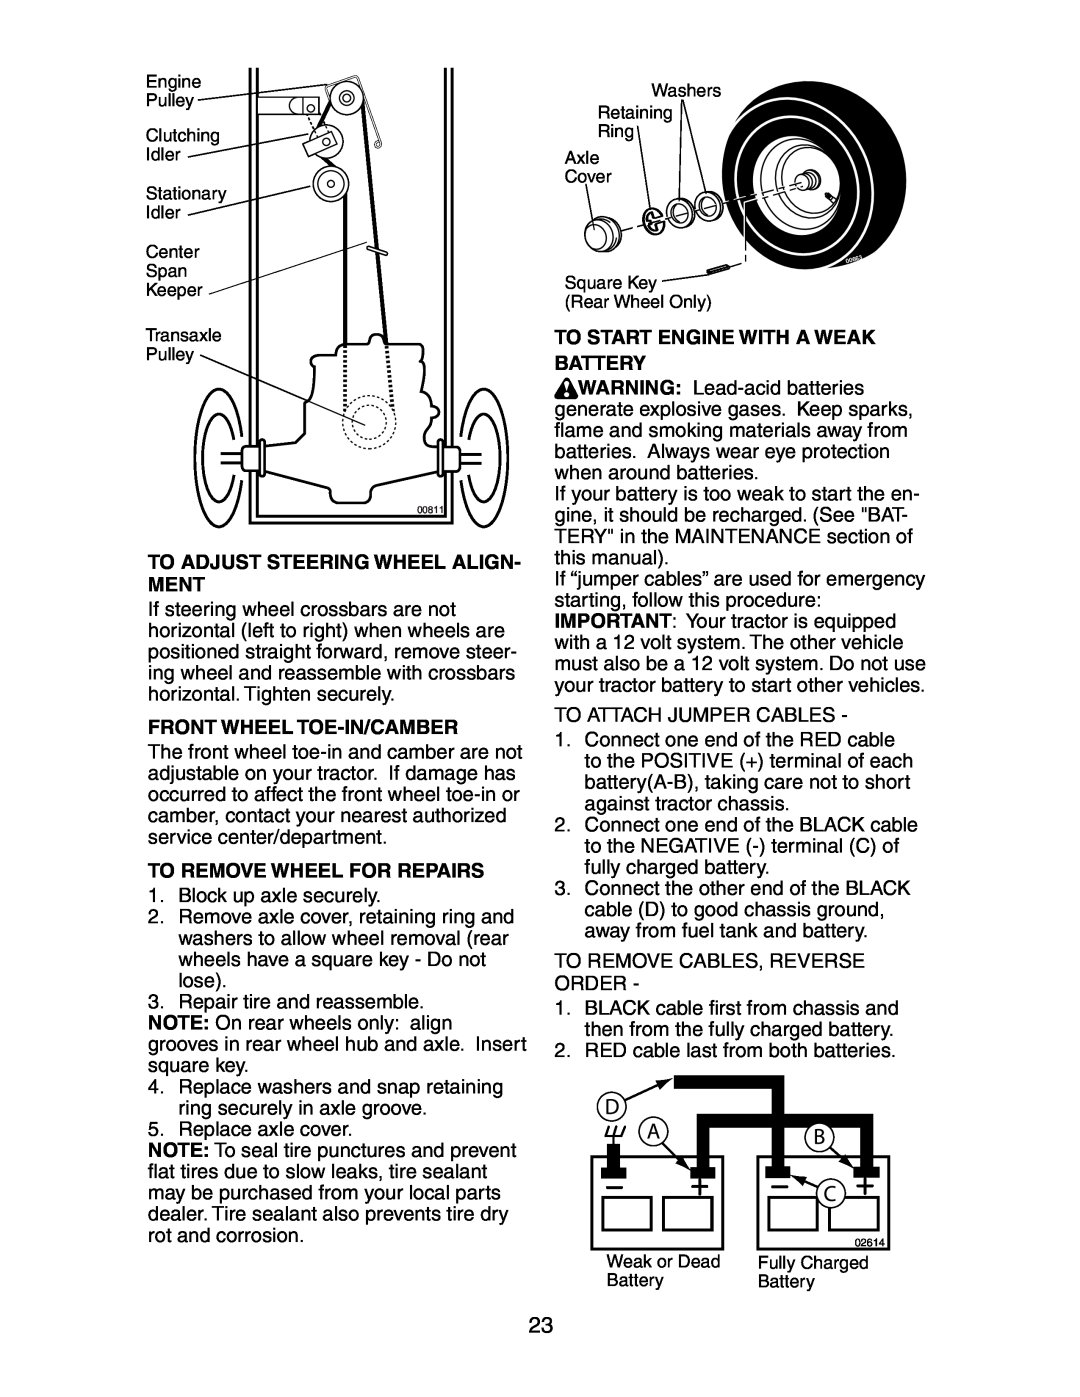 Poulan 191603 manual To Adjust Steering Wheel Align- Ment, Front Wheel Toe-In/Camber, To Remove Wheel For Repairs 